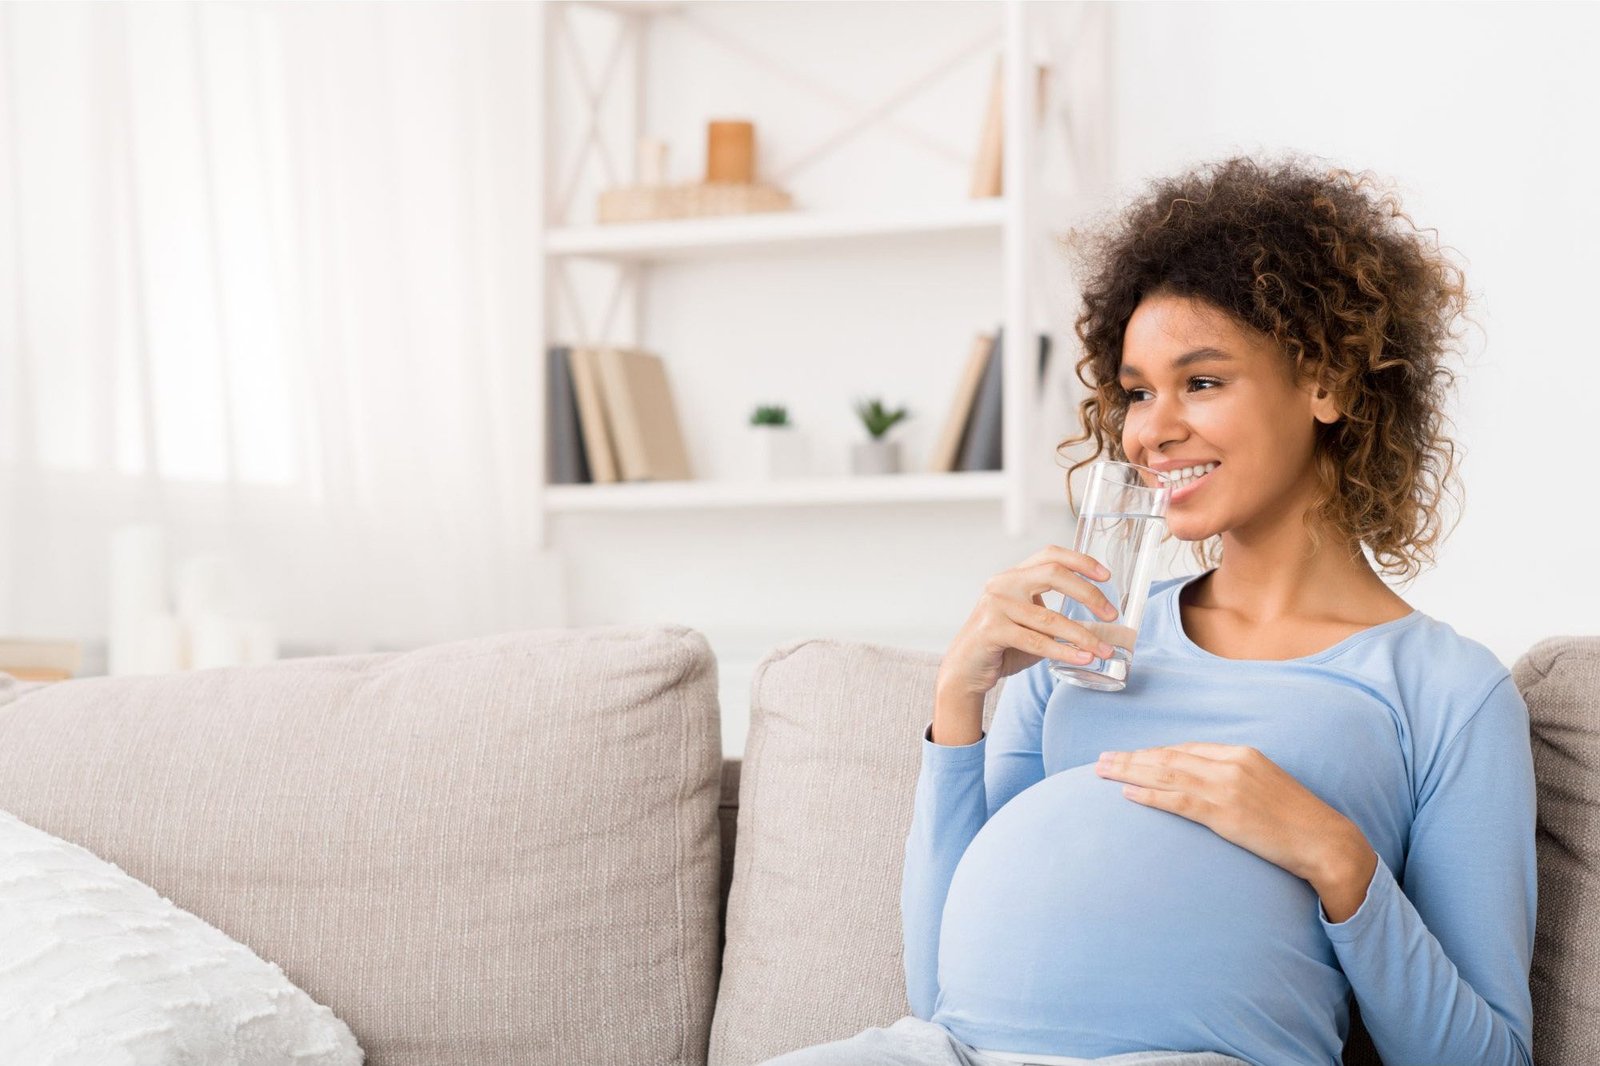 Millions Are at Risk – Fluoride Consumption During Pregnancy May Harm Fetal Brain Development